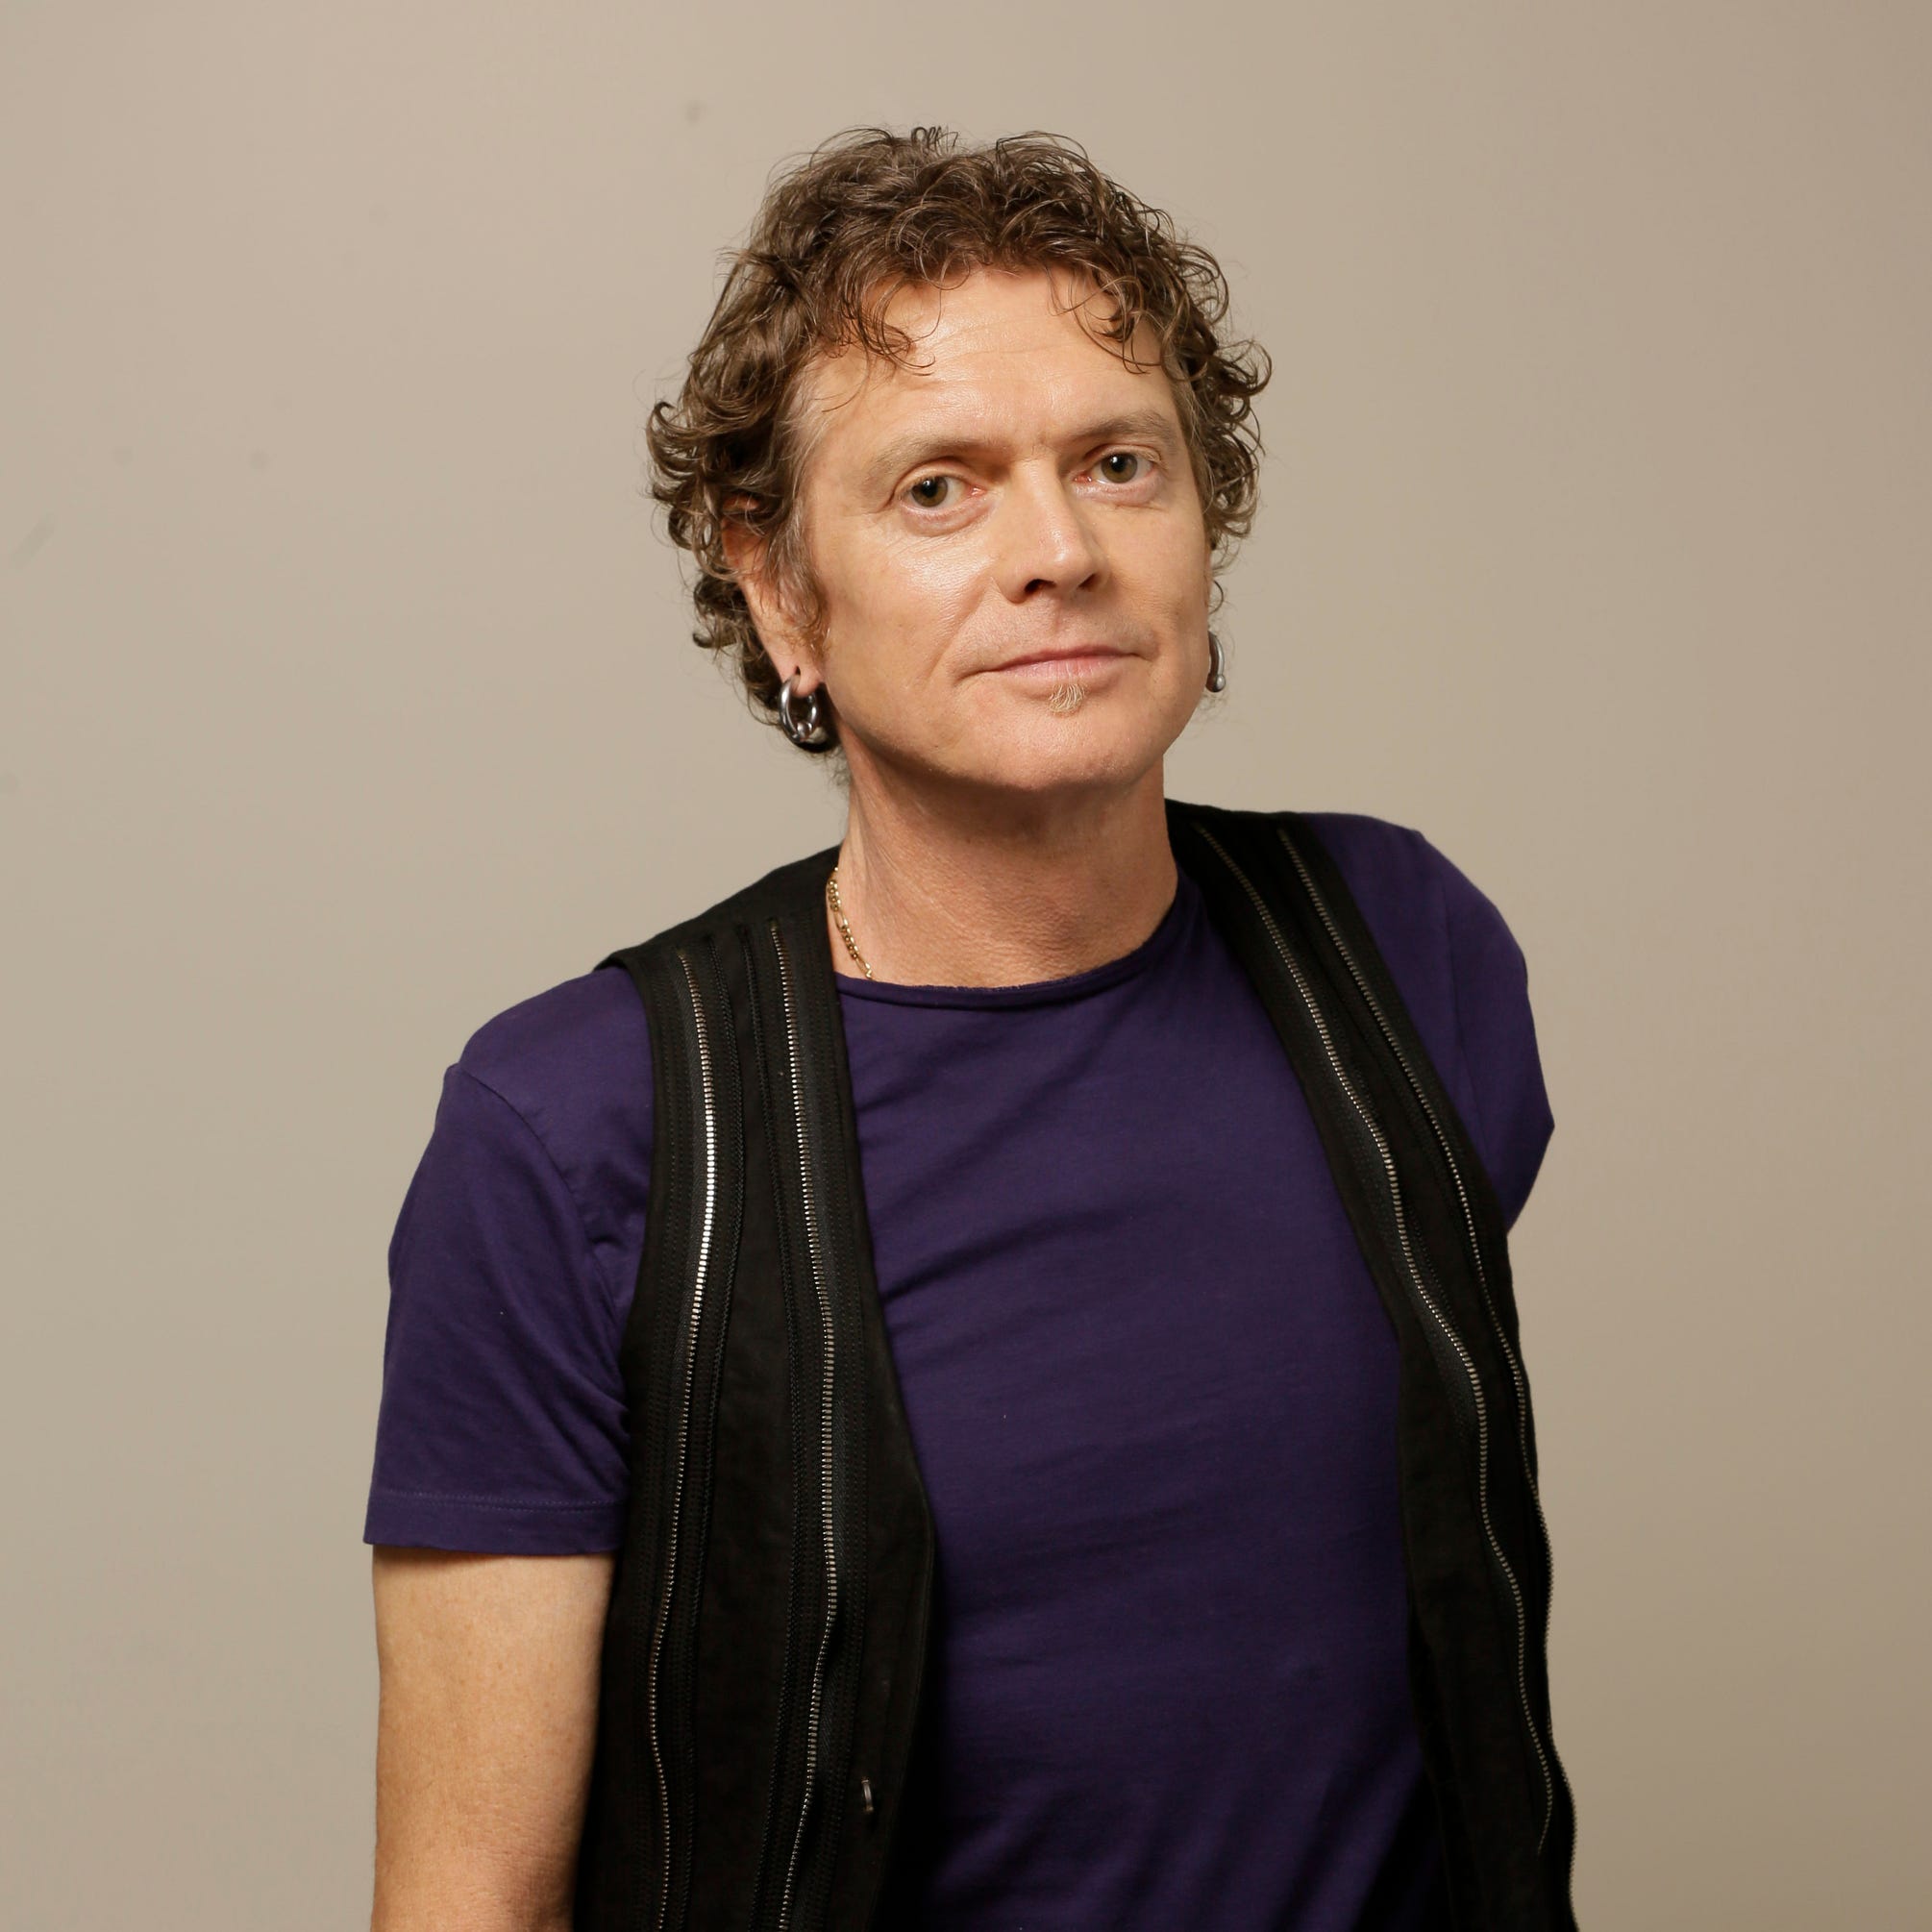 Def Leppard drummer Rick Allen poses for a photo in Los Angeles in 2013.